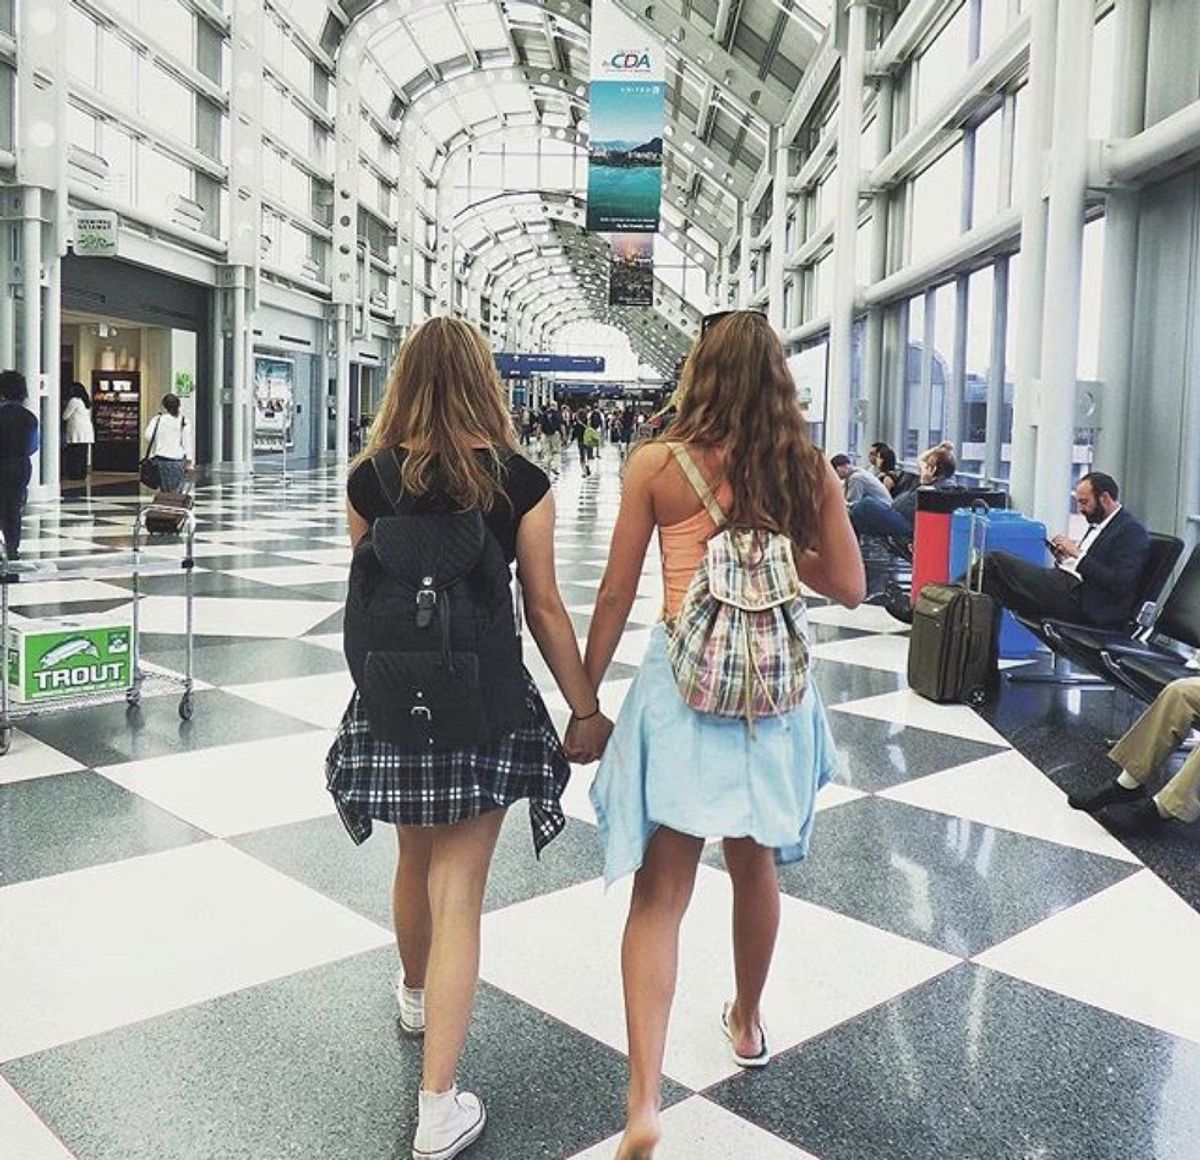 10 Photos That Will Make You Want To Drop Everything And Travel The World With Your BFF